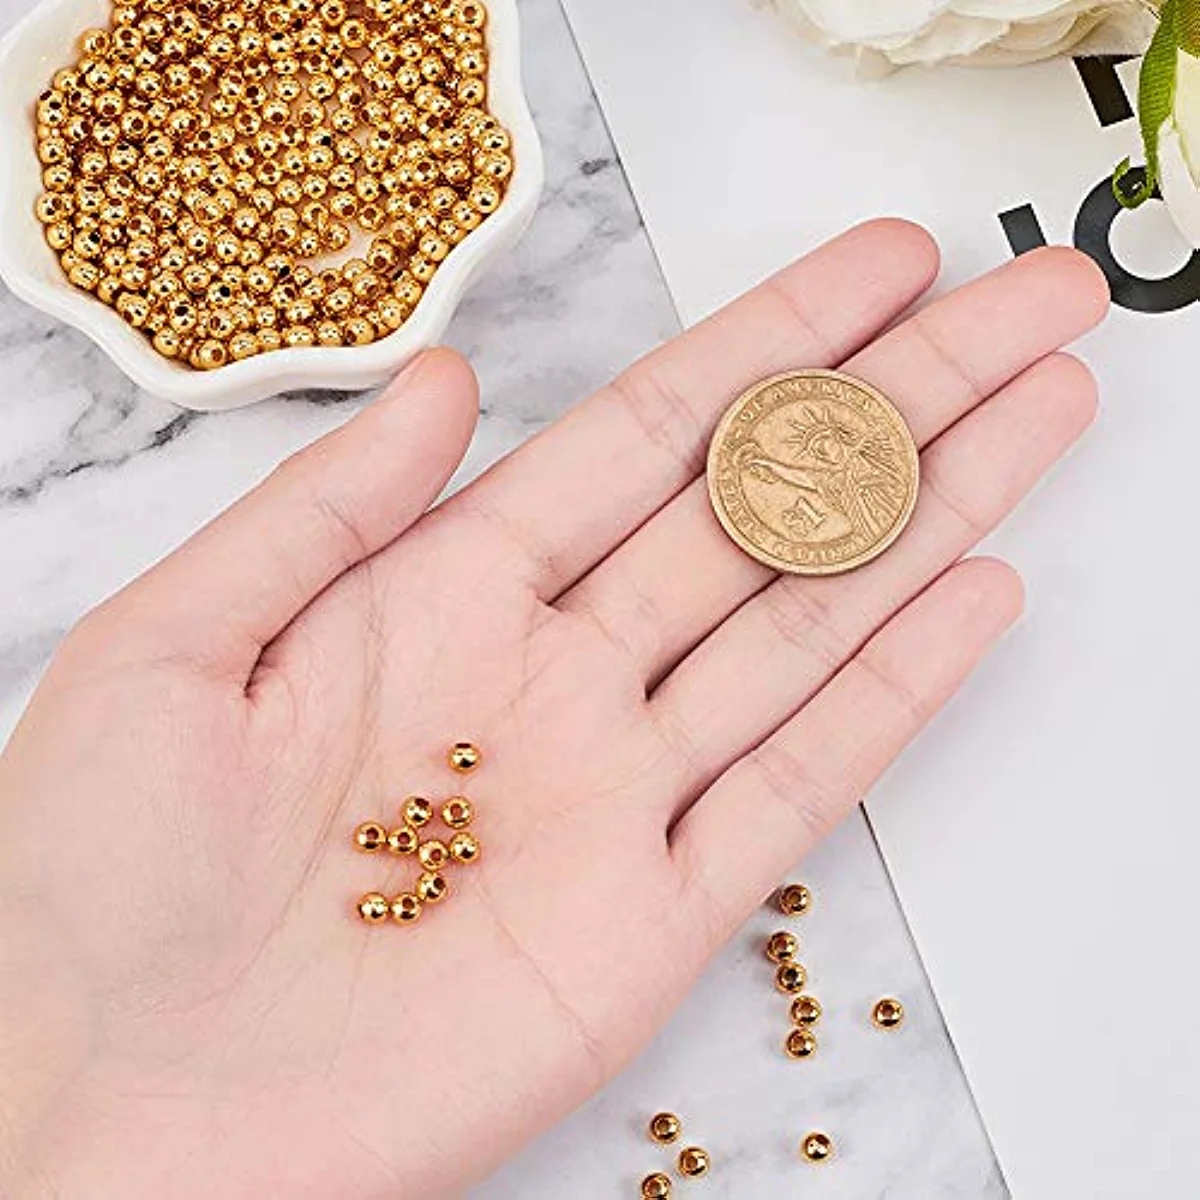 Metal Loose Big Hole Spacer Beads For Jewelry Making Findings Bracelet  Necklace DIY D 69299f From Ai805, $14.74